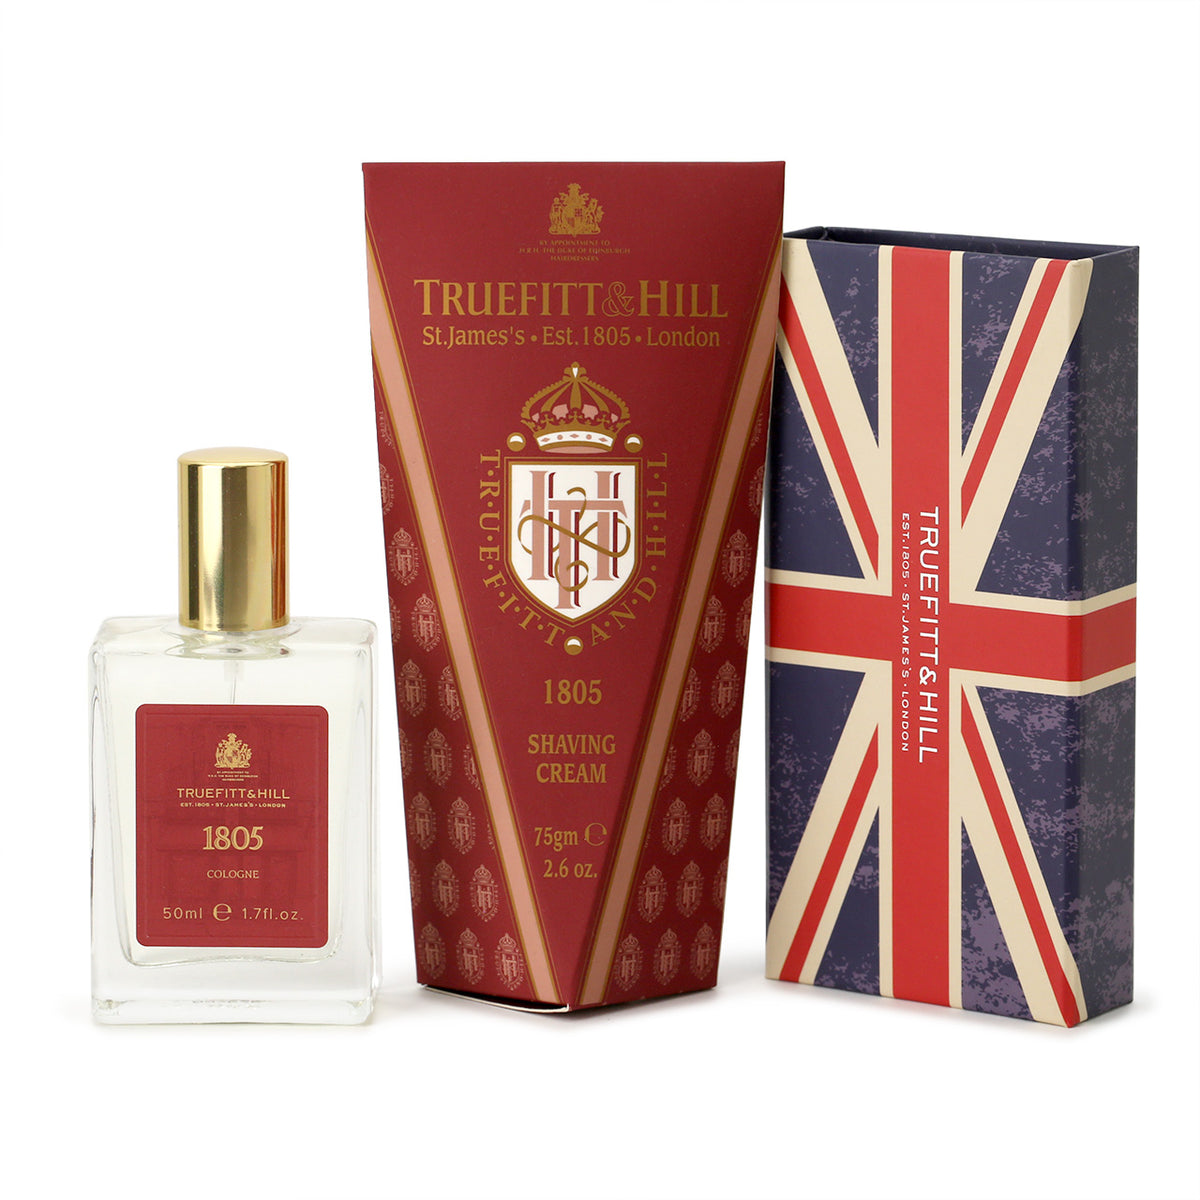 the bottle of 1805 Cologne with gold cap, Truefitt &amp; Hill Shaving cream and Keyring inside its own gift box